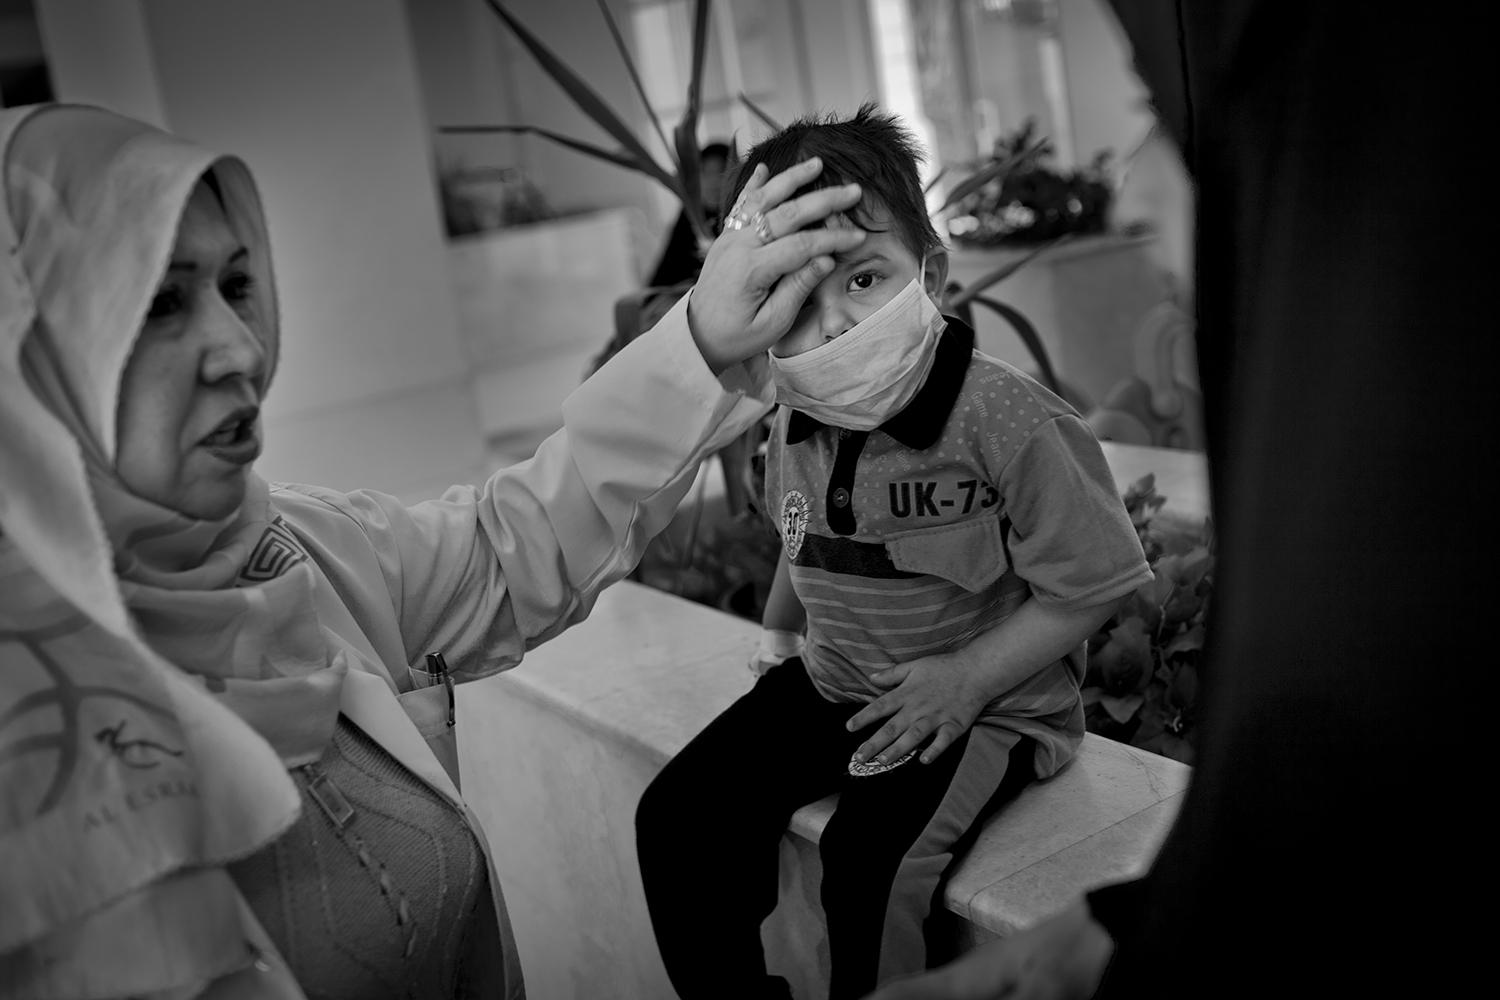 Apr. 23, 2012. Basra. An oncologist examines a young boy with cerebral tumors in the Children's Hospital.